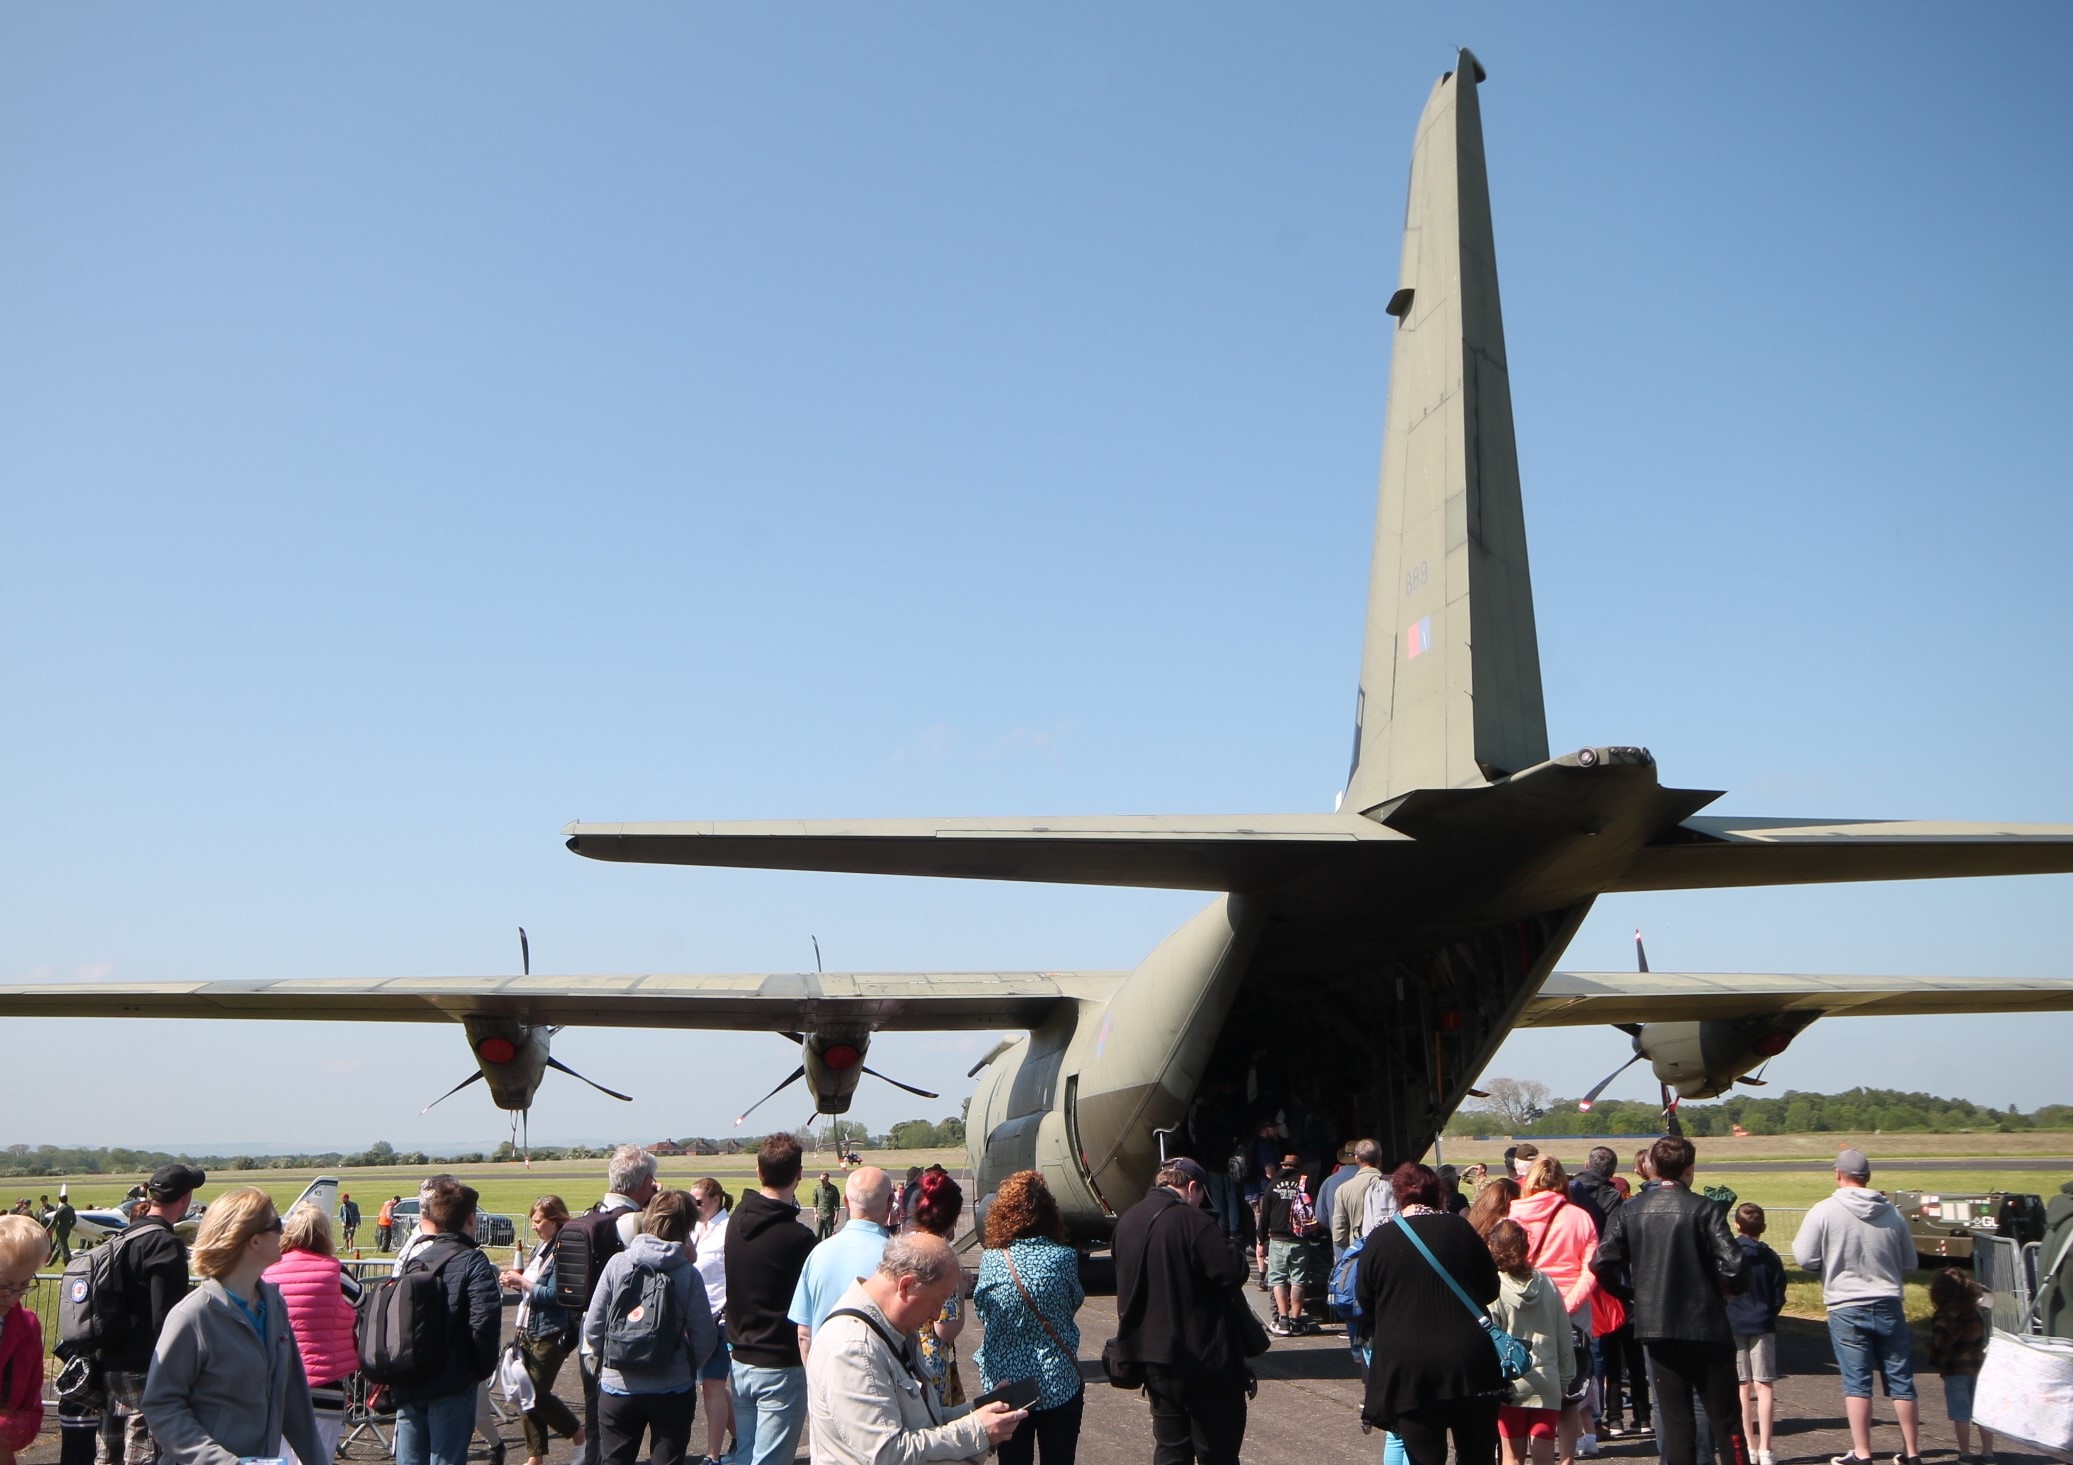 The RAF’s C-130J Hercules has made one of its final public appearances ahead of its retirement at the end of June.